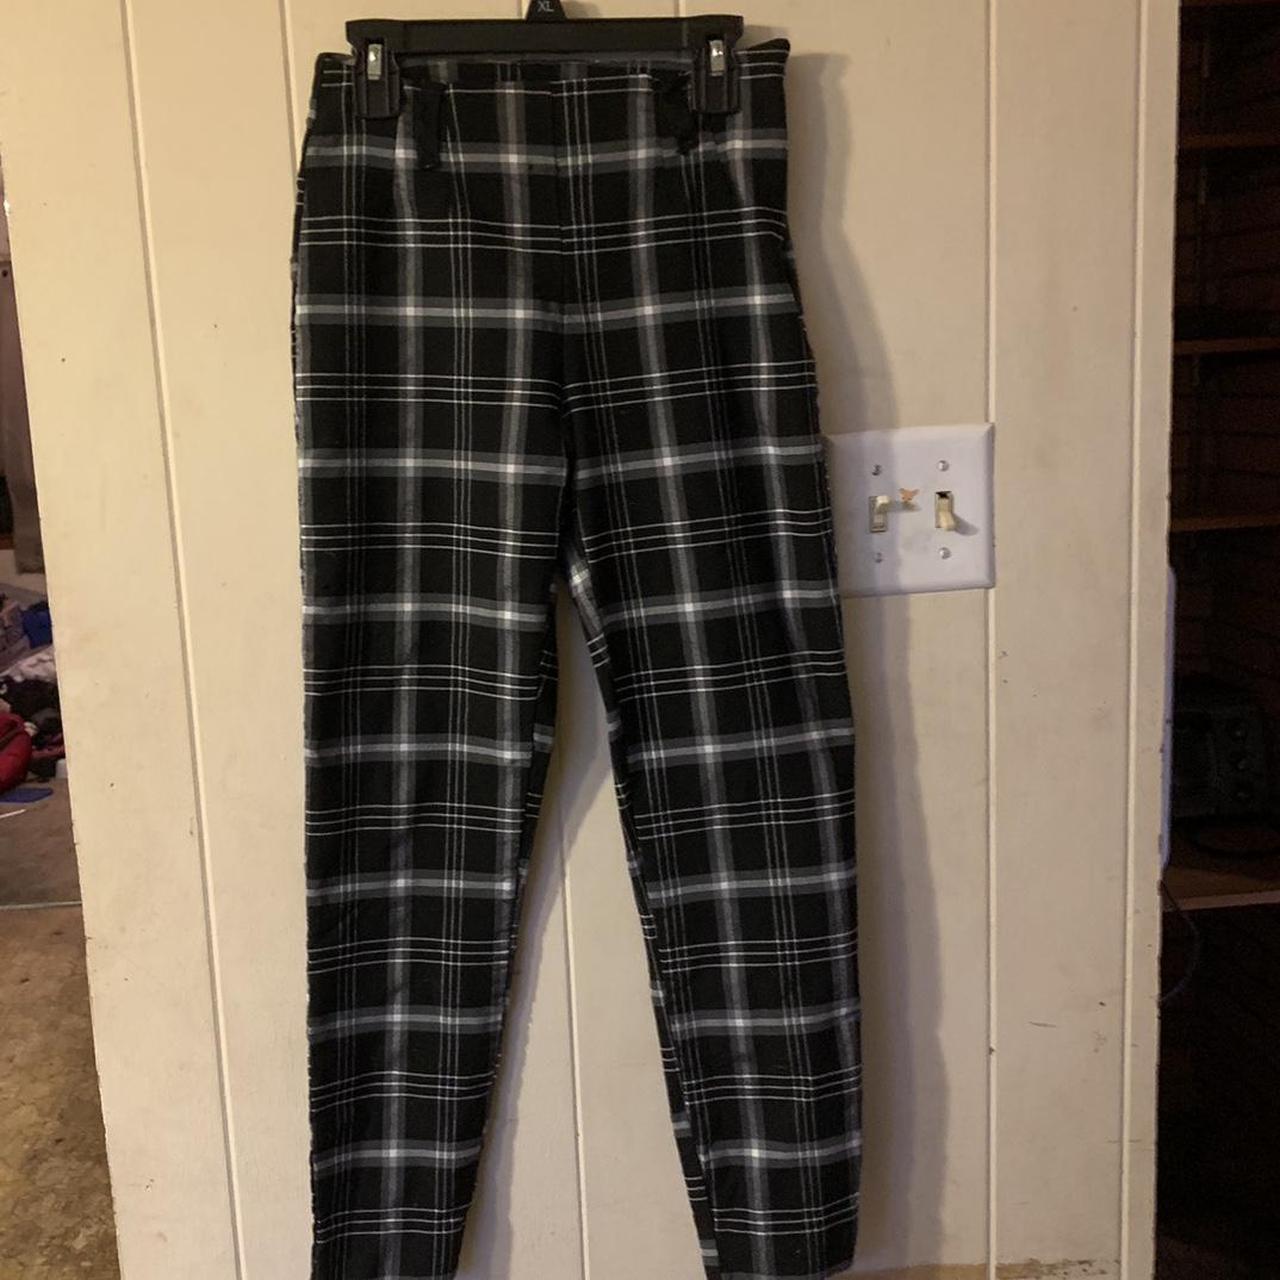 Back and White Plaid Time and Tru Pants - Depop